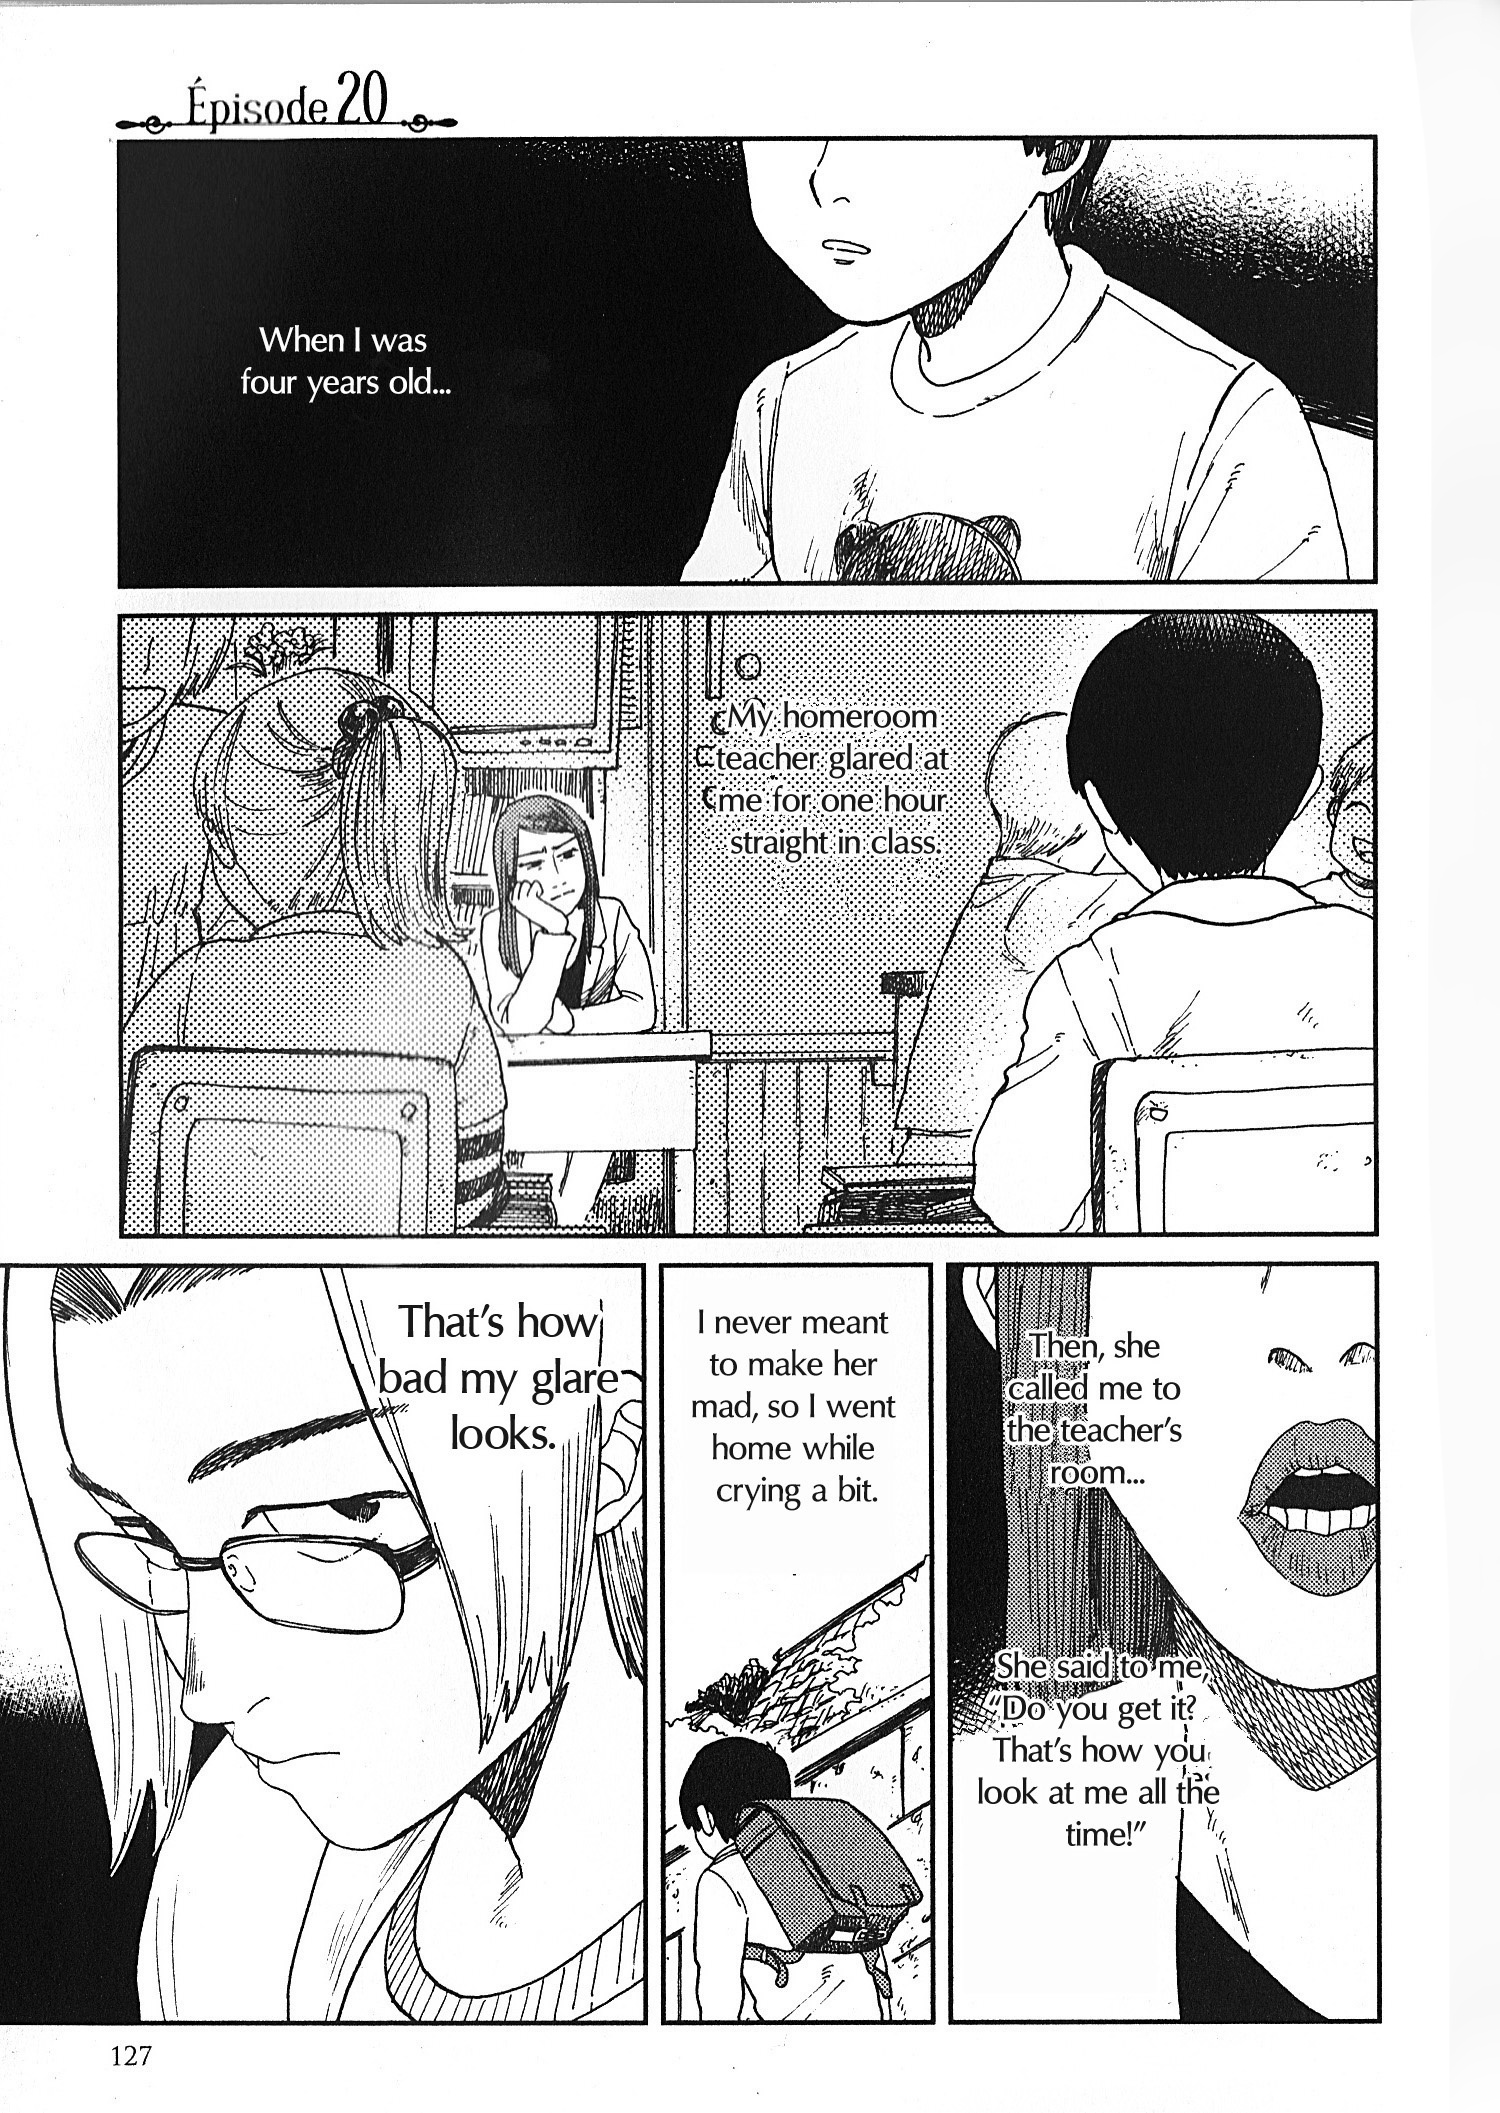 Artiste Vol.4 Chapter 20: Episode 20 - Picture 1